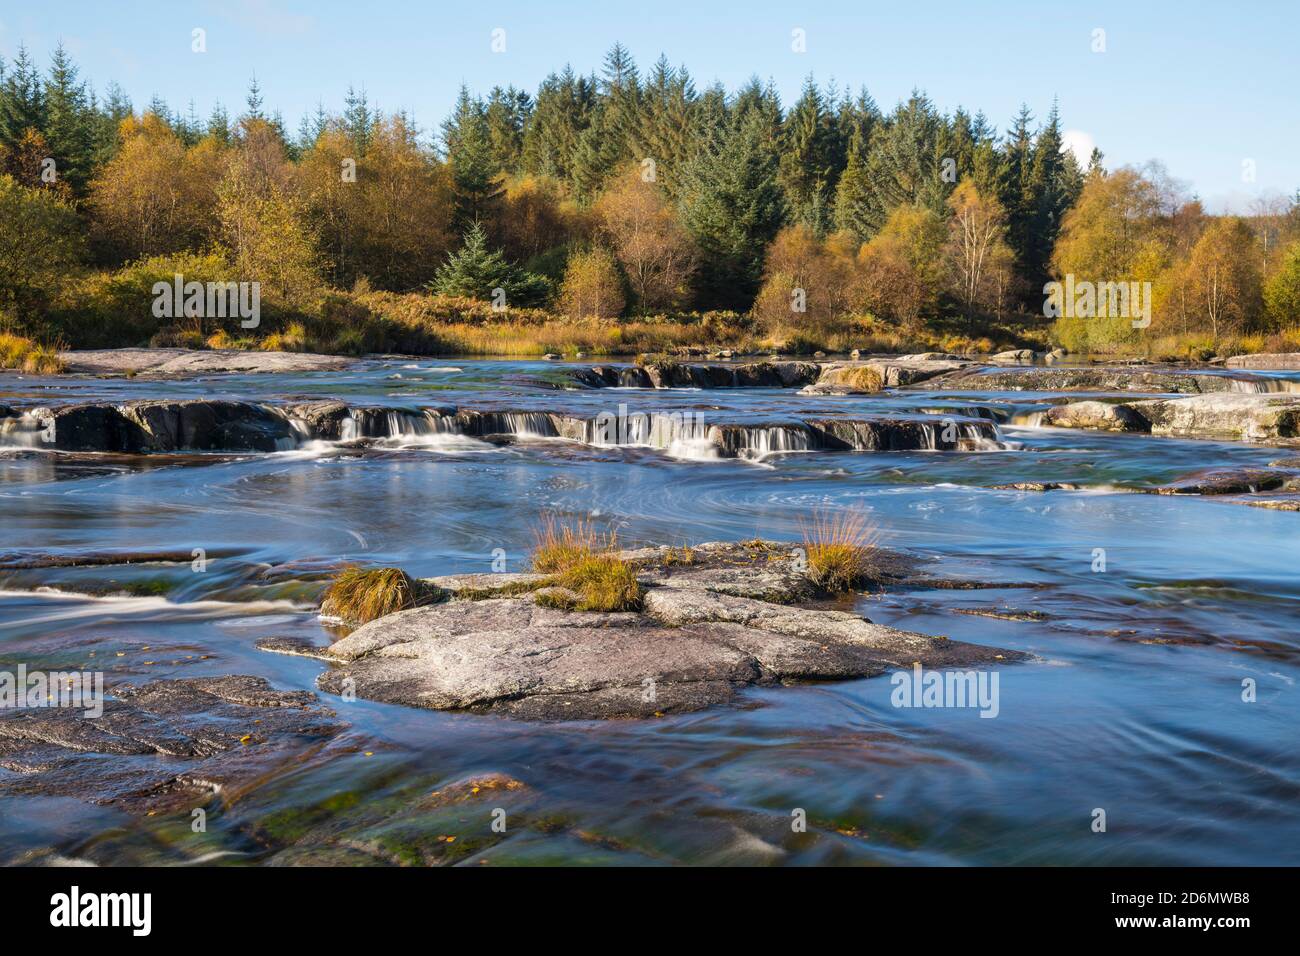 Piscine Otter in autunno, fiume Dee, Galloway Forest, Dumfries & Galloway, Scozia Foto Stock